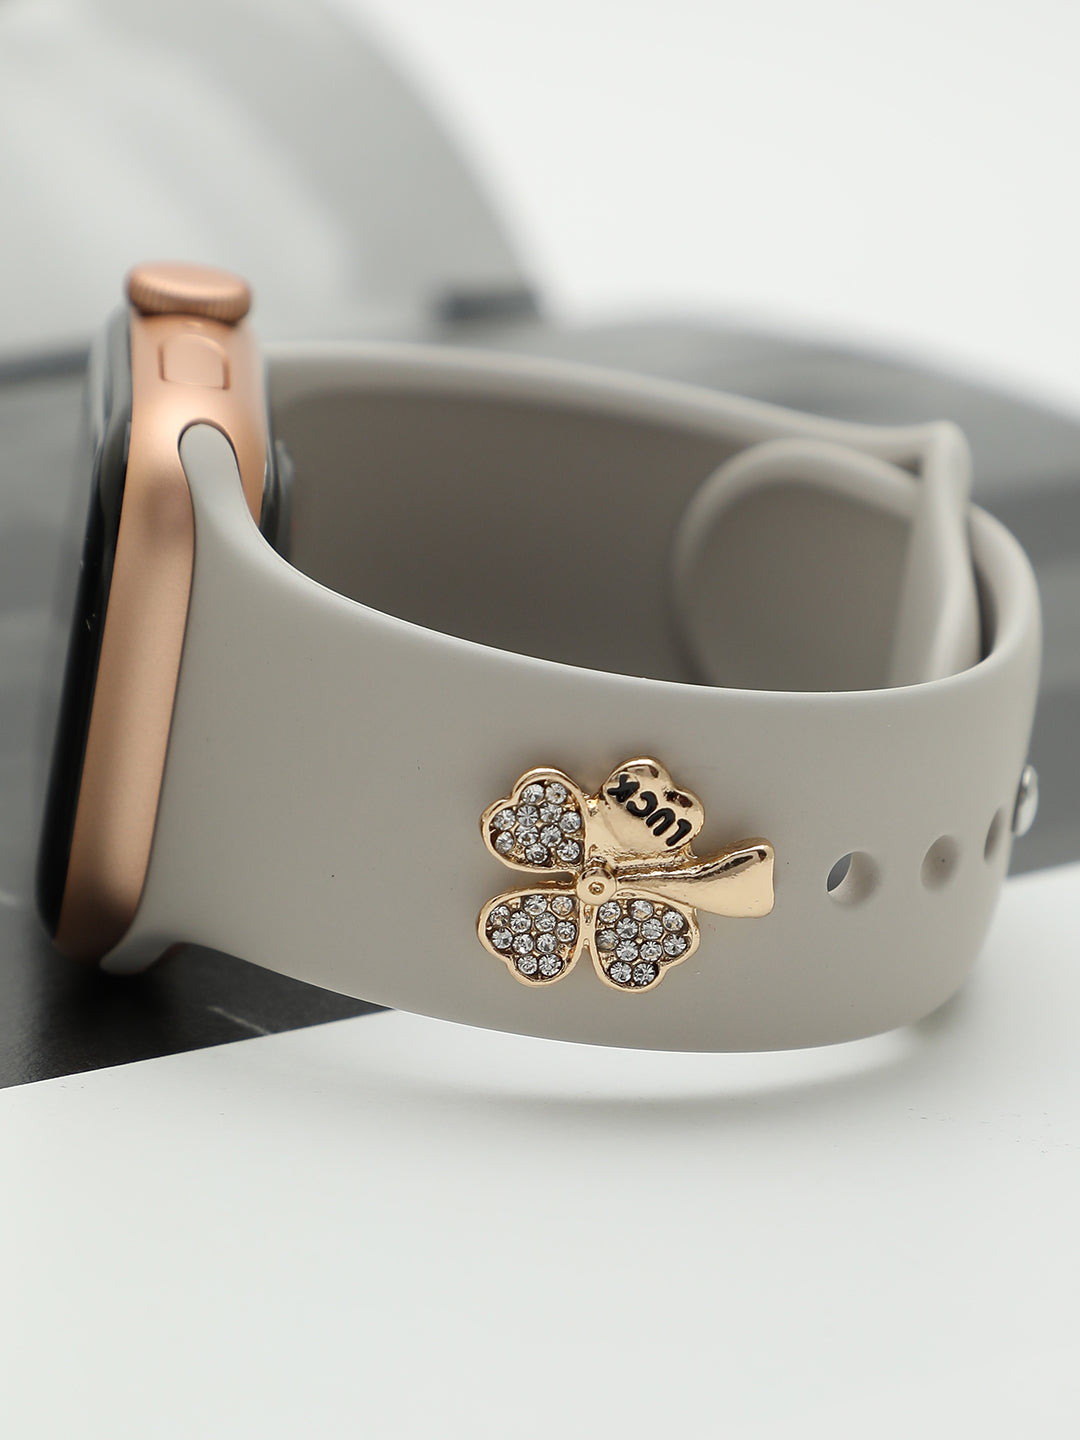 A Stylish Twist For Your Apple Watch